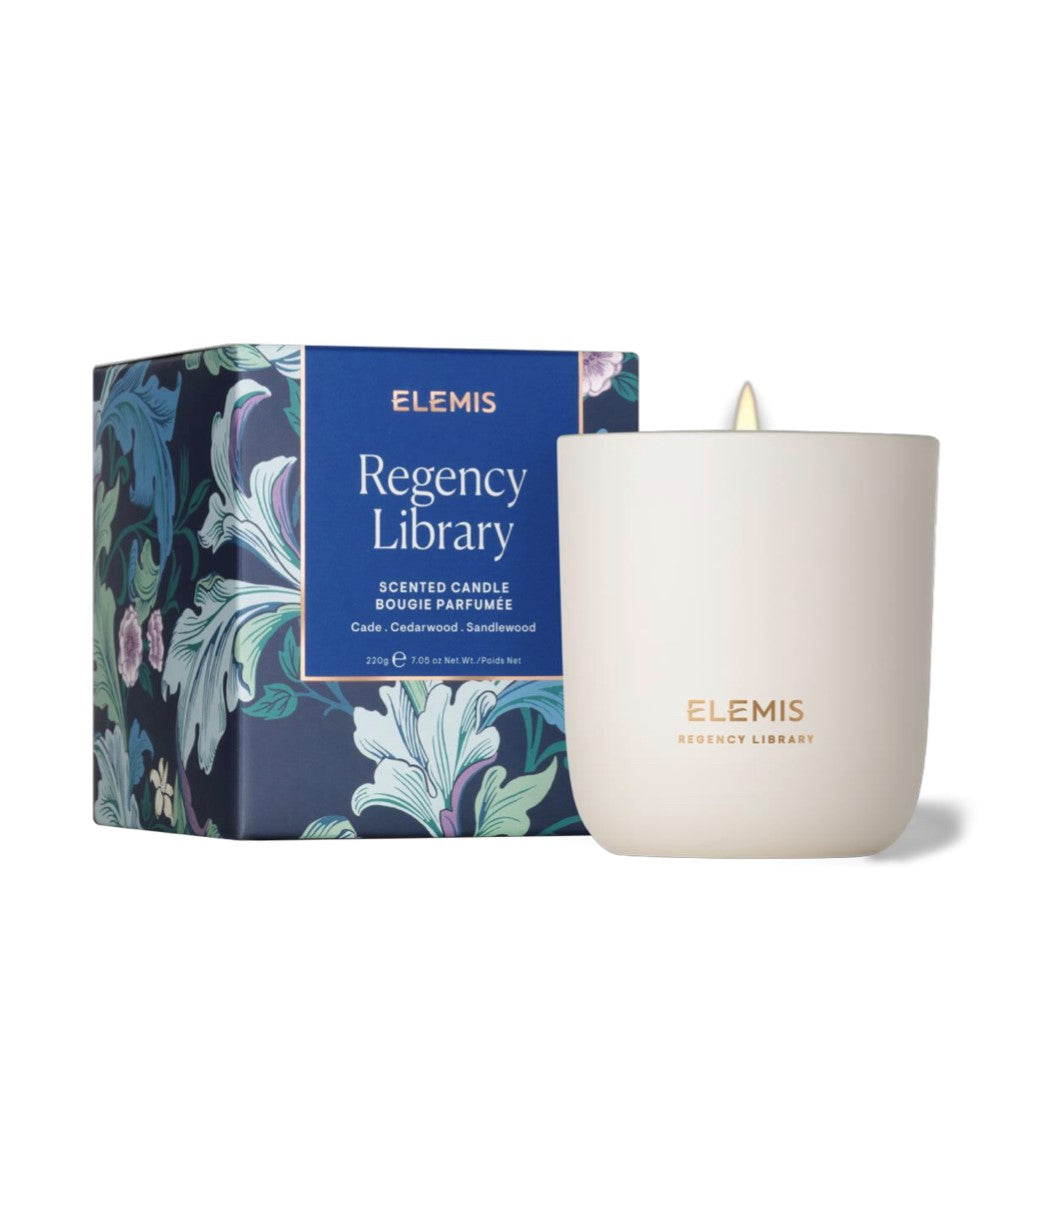 ELEMIS Regency Library Scented Candle